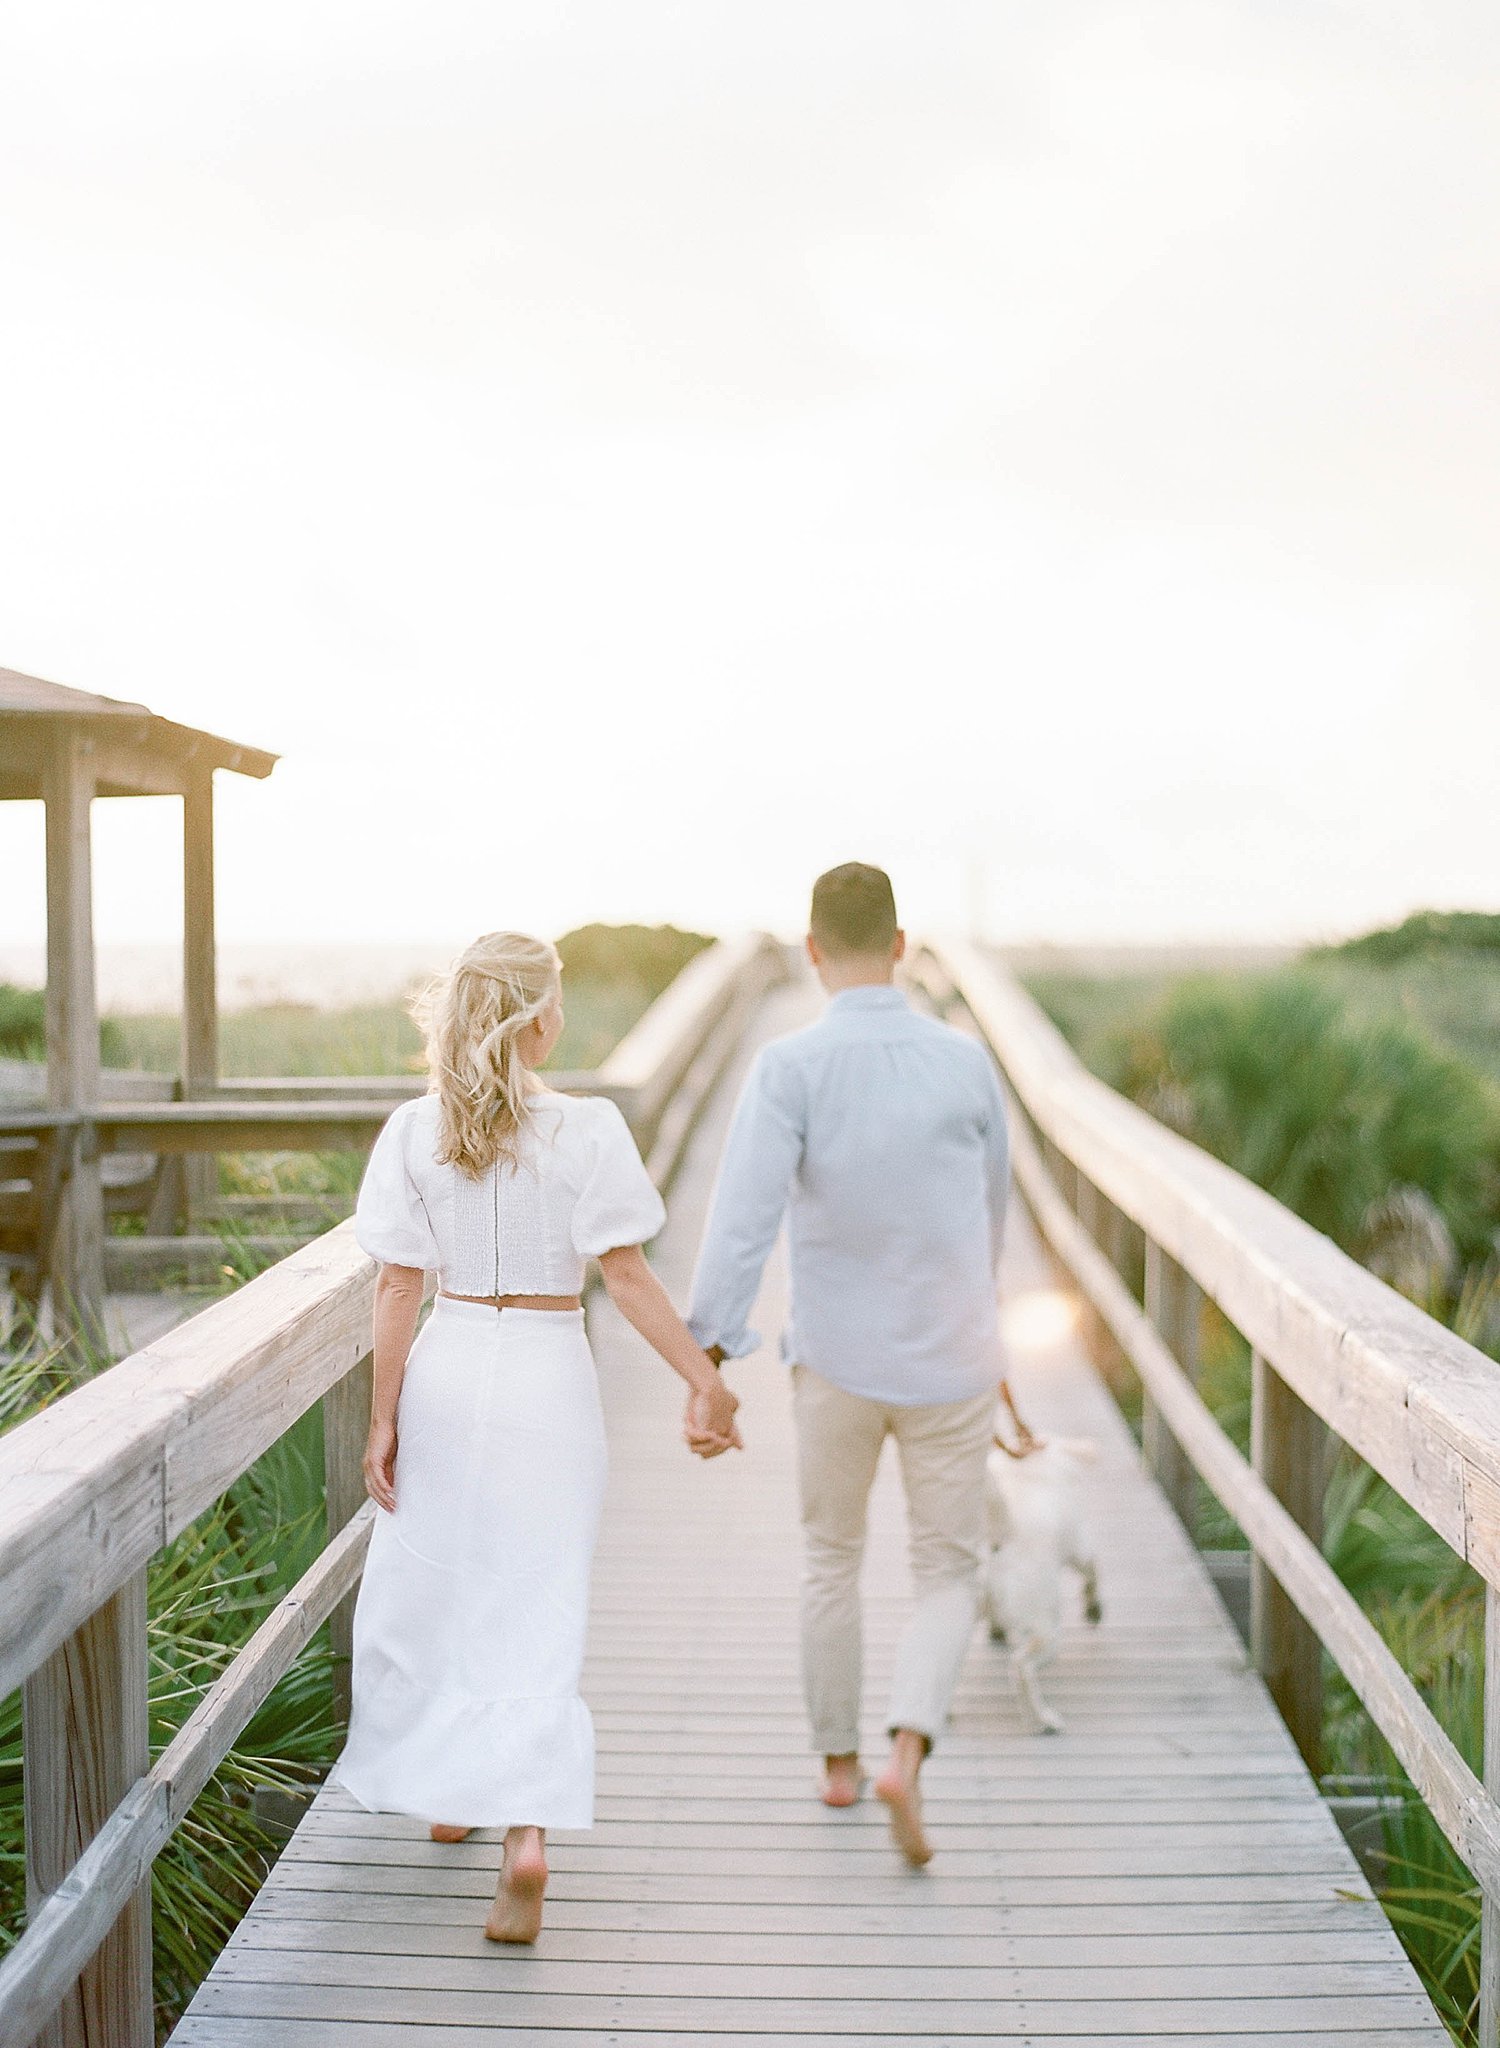 Tybee Island Engagement Session on the boardwalk